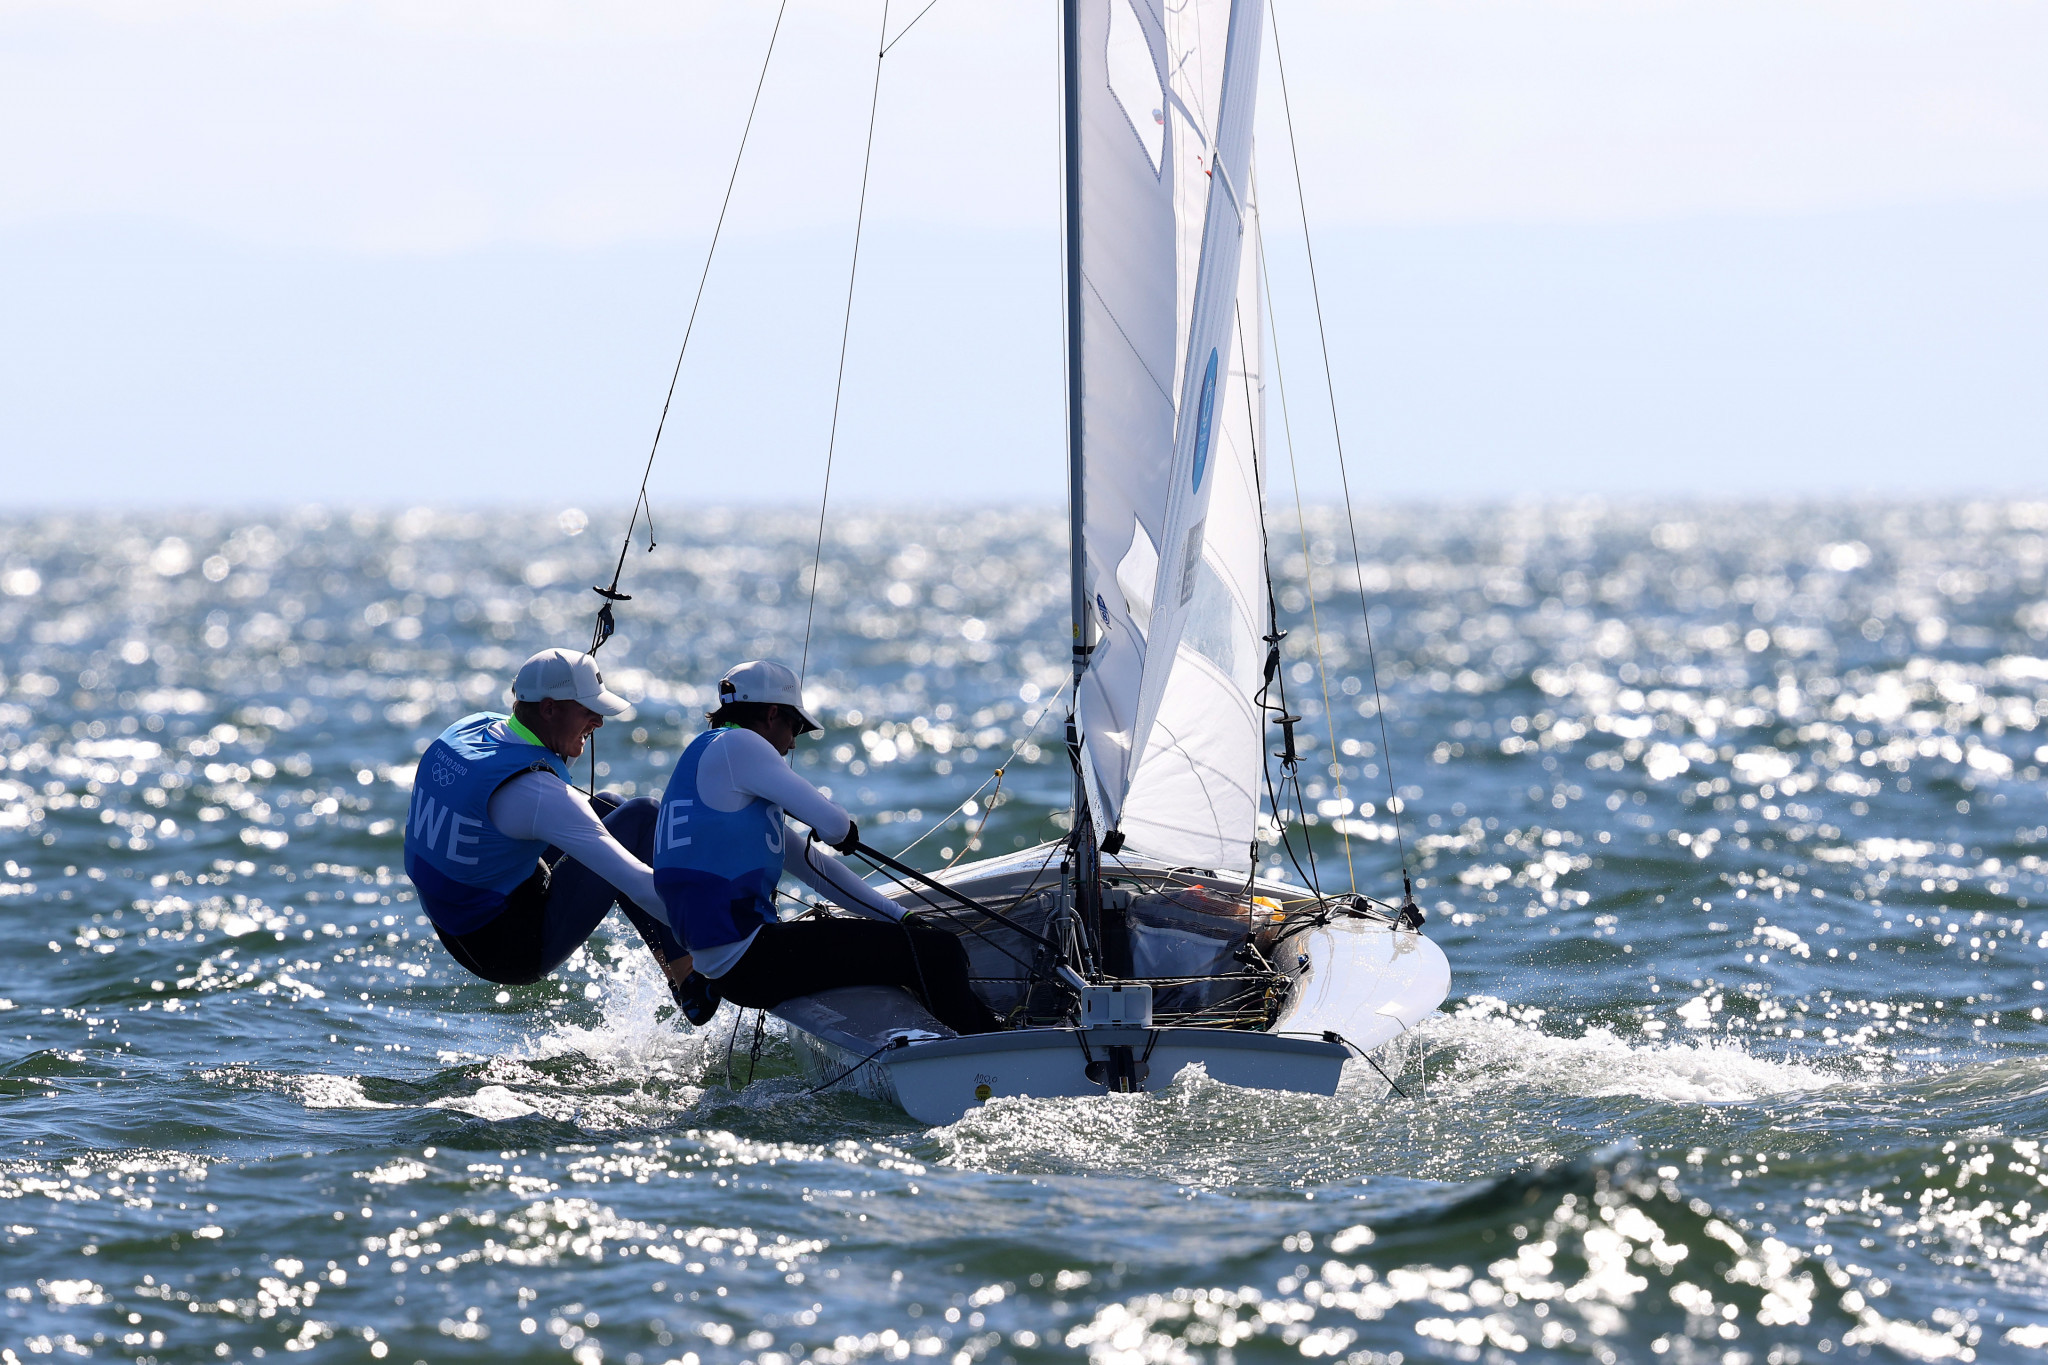 World Sailing in funding appeal to support Ukrainian athletes